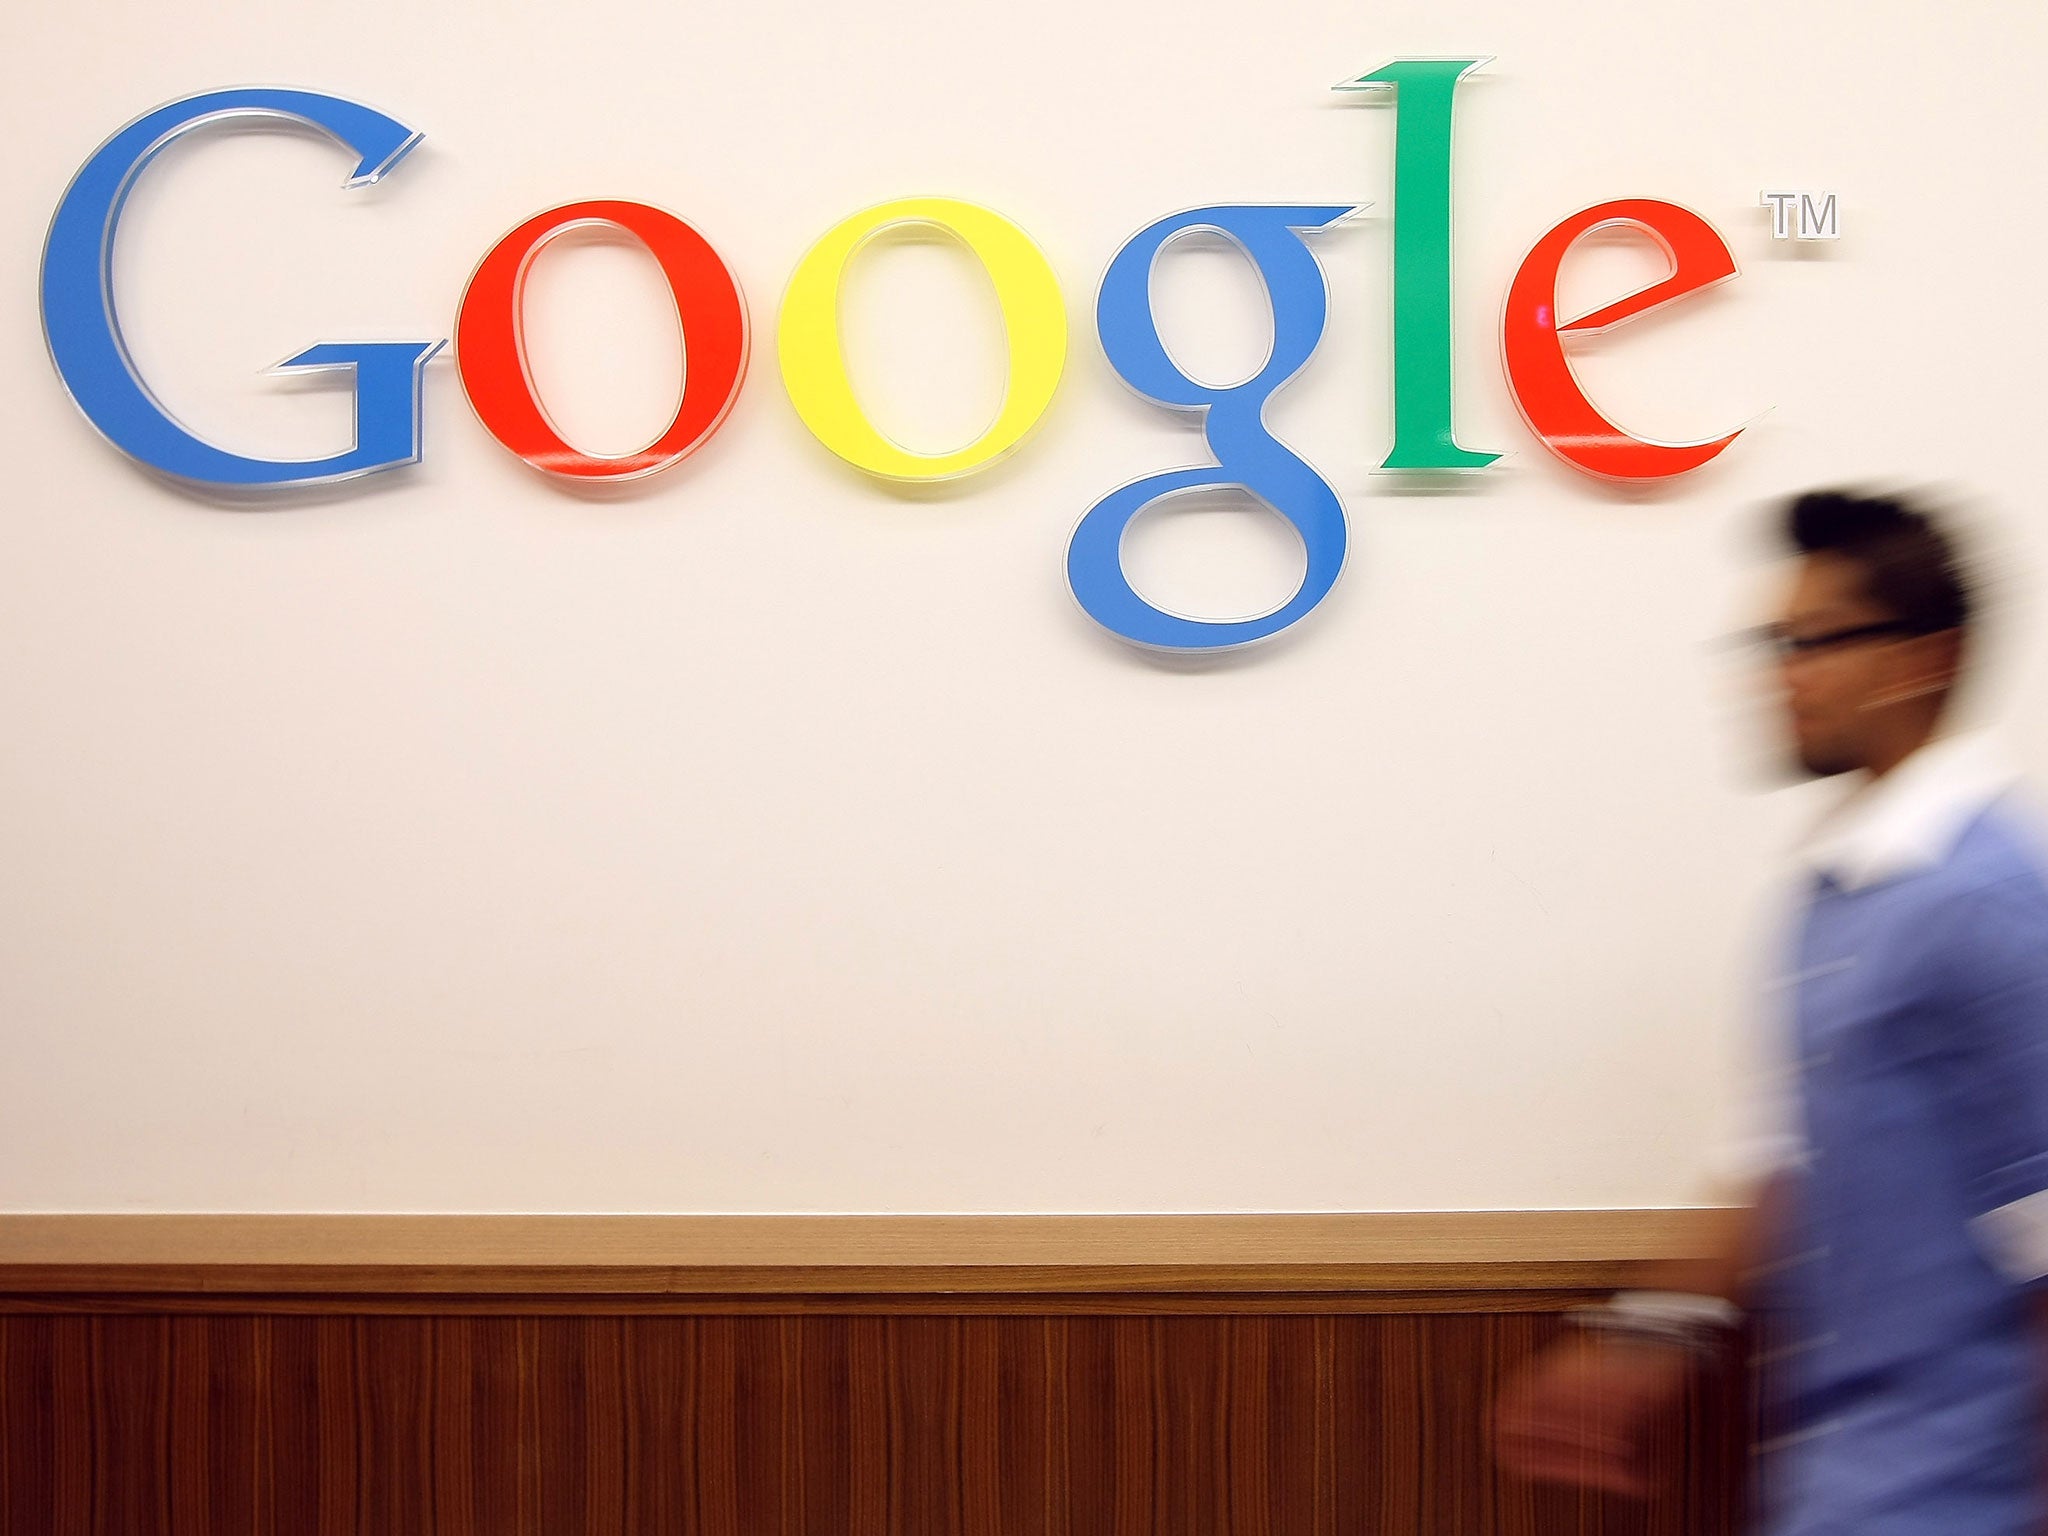 The Google “right to be forgotten” ruling is creating a boom time for reputation management PR companies, which are charging clients for having personal information erased from the Internet